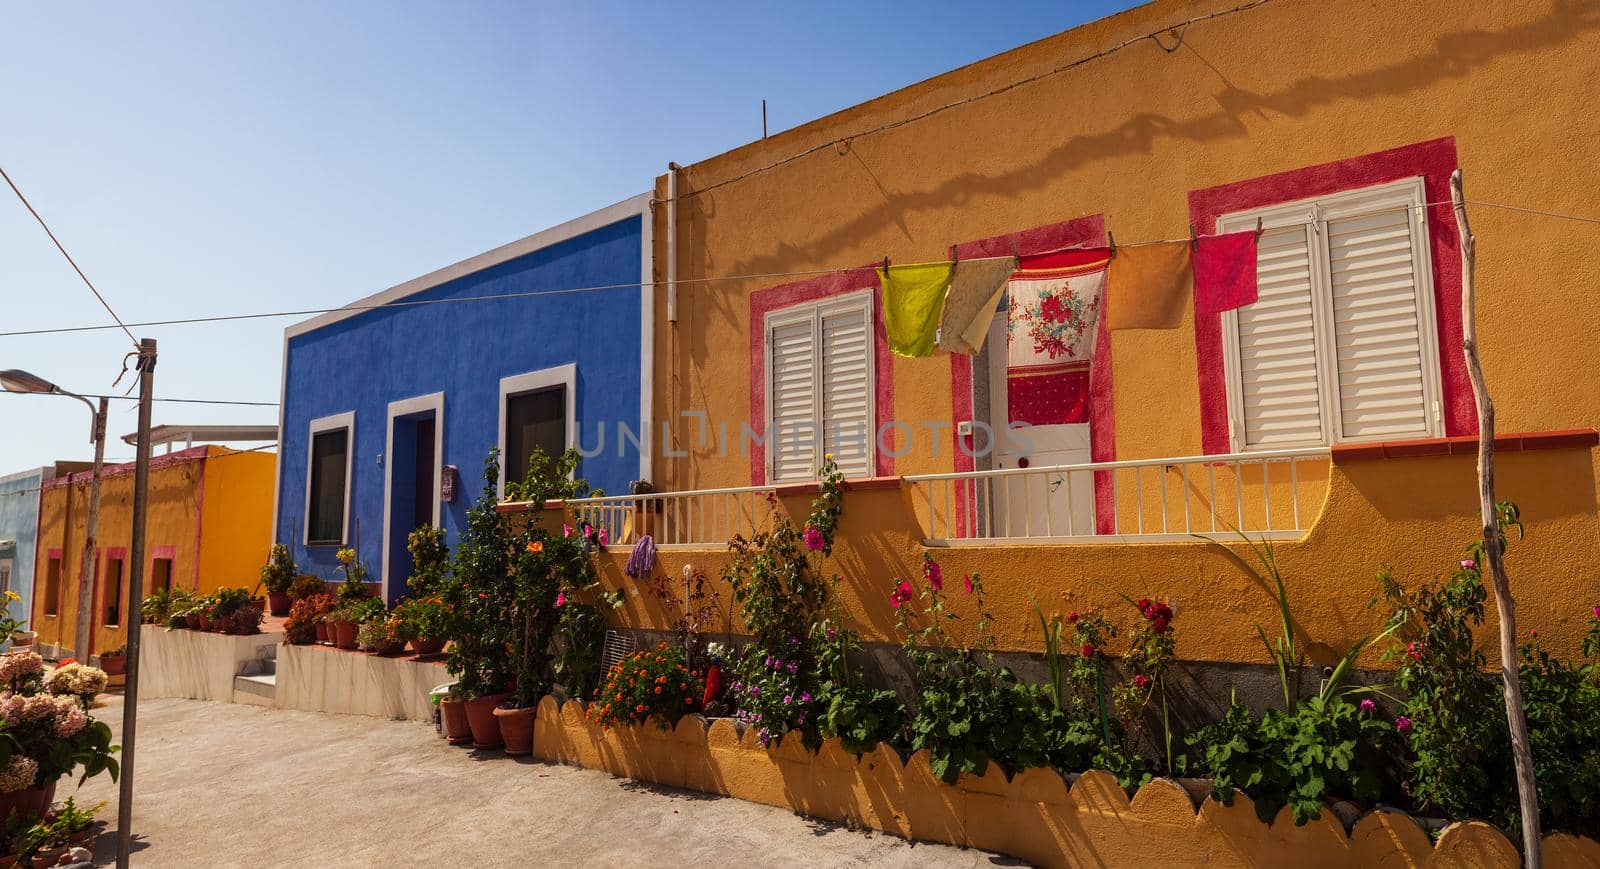 View of a typical colorful houses of Linosa, colored with blue red and orange by bepsimage